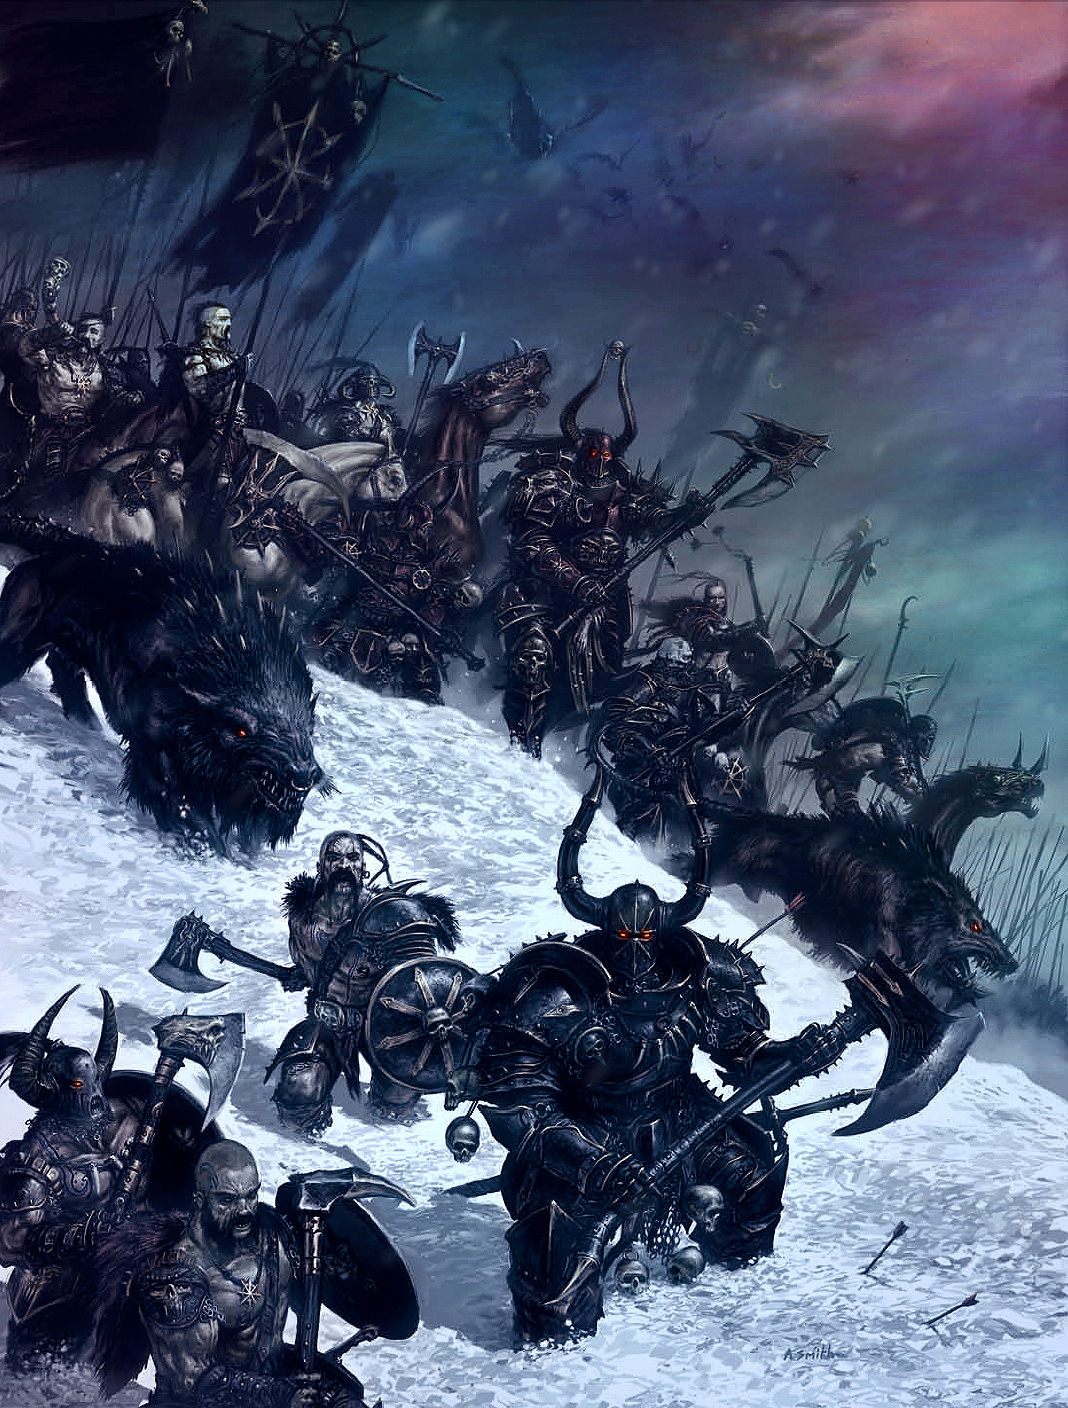 Warhammer's guide to DnD - Warriors of Chaos